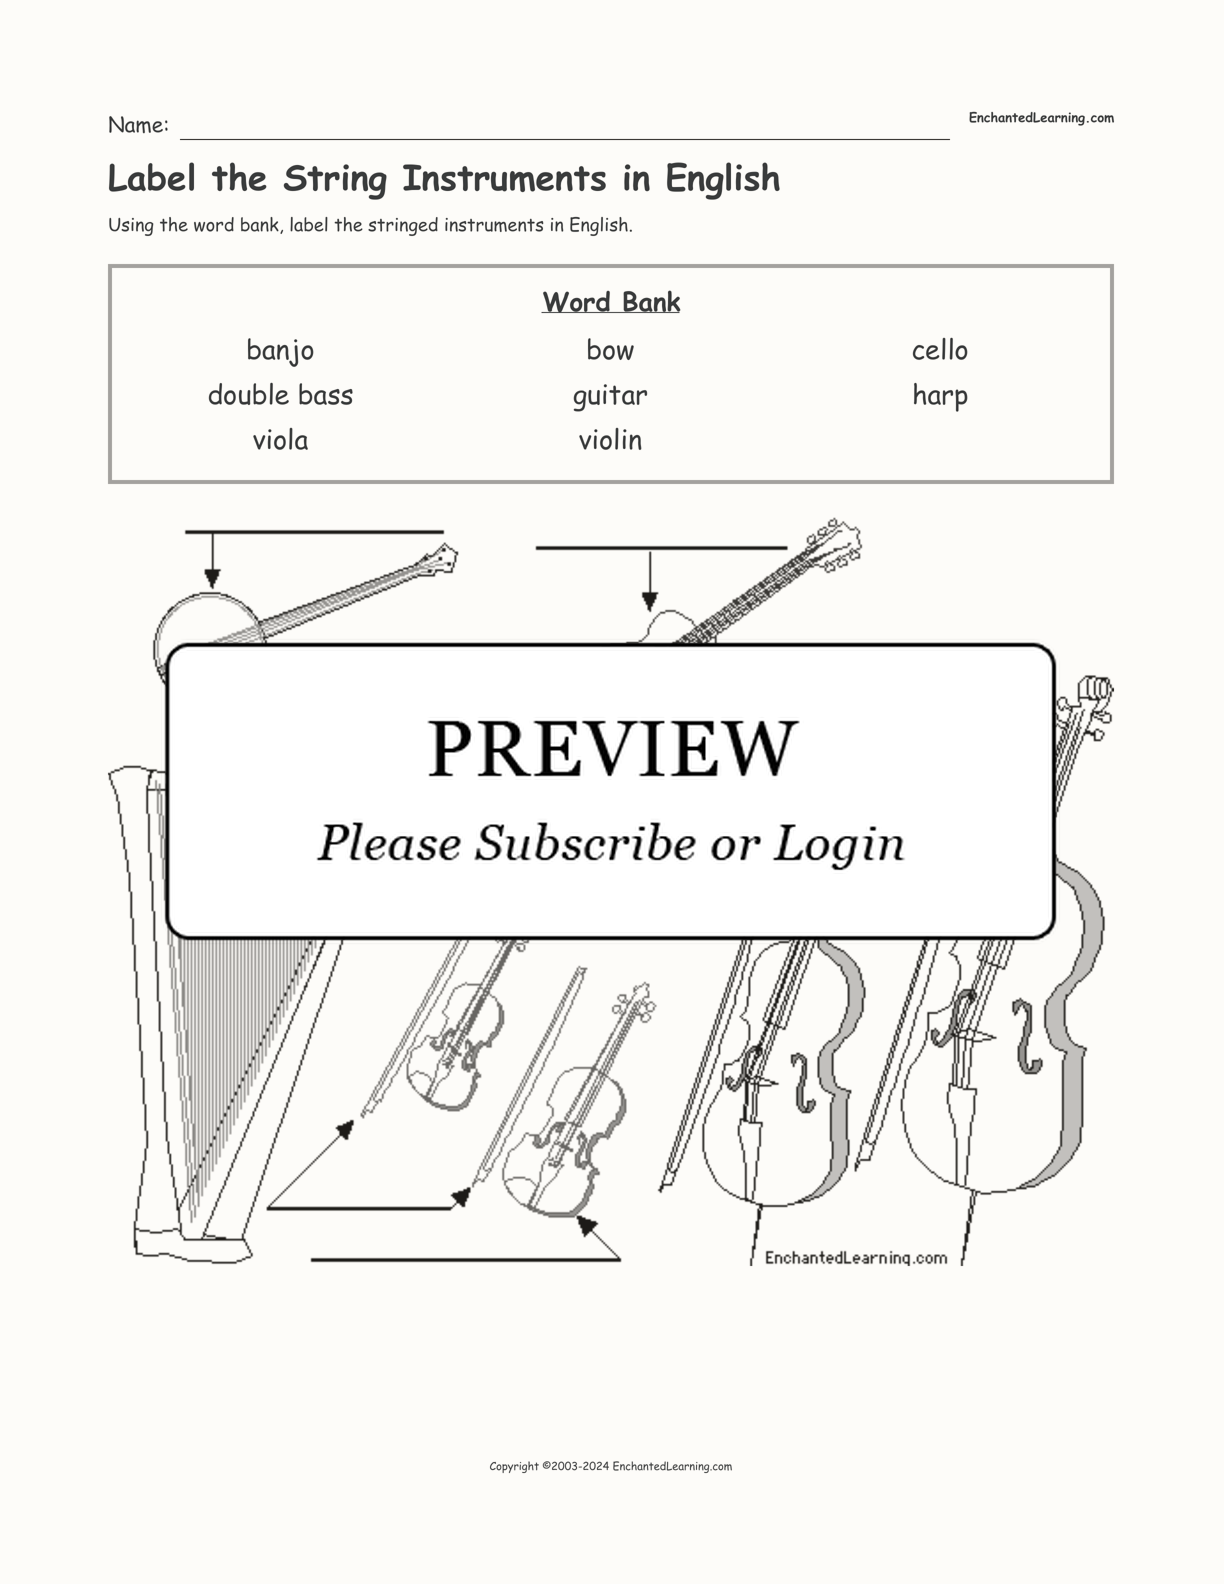 Label the String Instruments in English interactive worksheet page 1